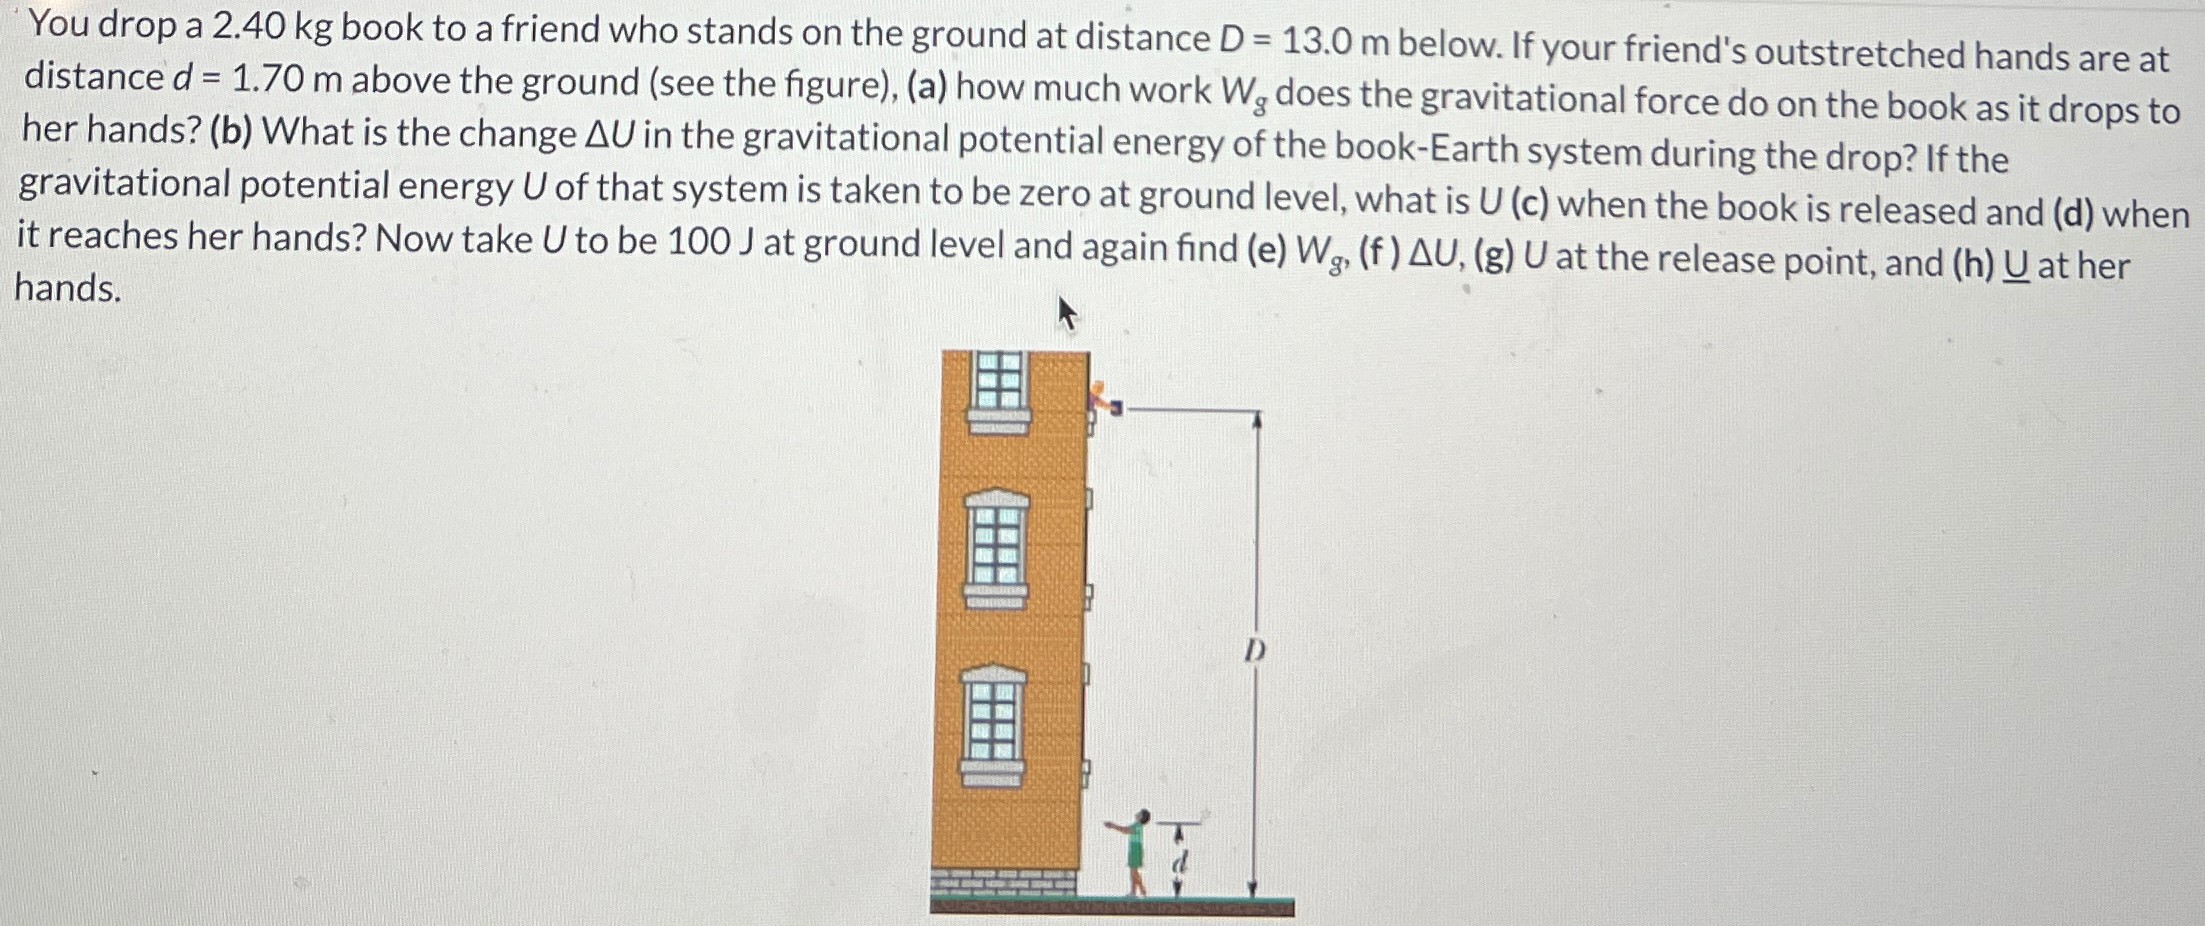 You drop a 2.40 kg book to a friend who stands on the ground at distance D = 13.0 m below. If your friend's outstretched hands are at distance d = 1.70 m above the ground (see the figure), (a) how much work Wg does the gravitational force do on the book as it drops to her hands? (b) What is the change ΔU in the gravitational potential energy of the book-Earth system during the drop? If the gravitational potential energy U of that system is taken to be zero at ground level, what is U (c) when the book is released and (d) when it reaches her hands? Now take U to be 100 J at ground level and again find (e) Wg, (f) ΔU, (g)U at the release point, and (h) U at her hands.